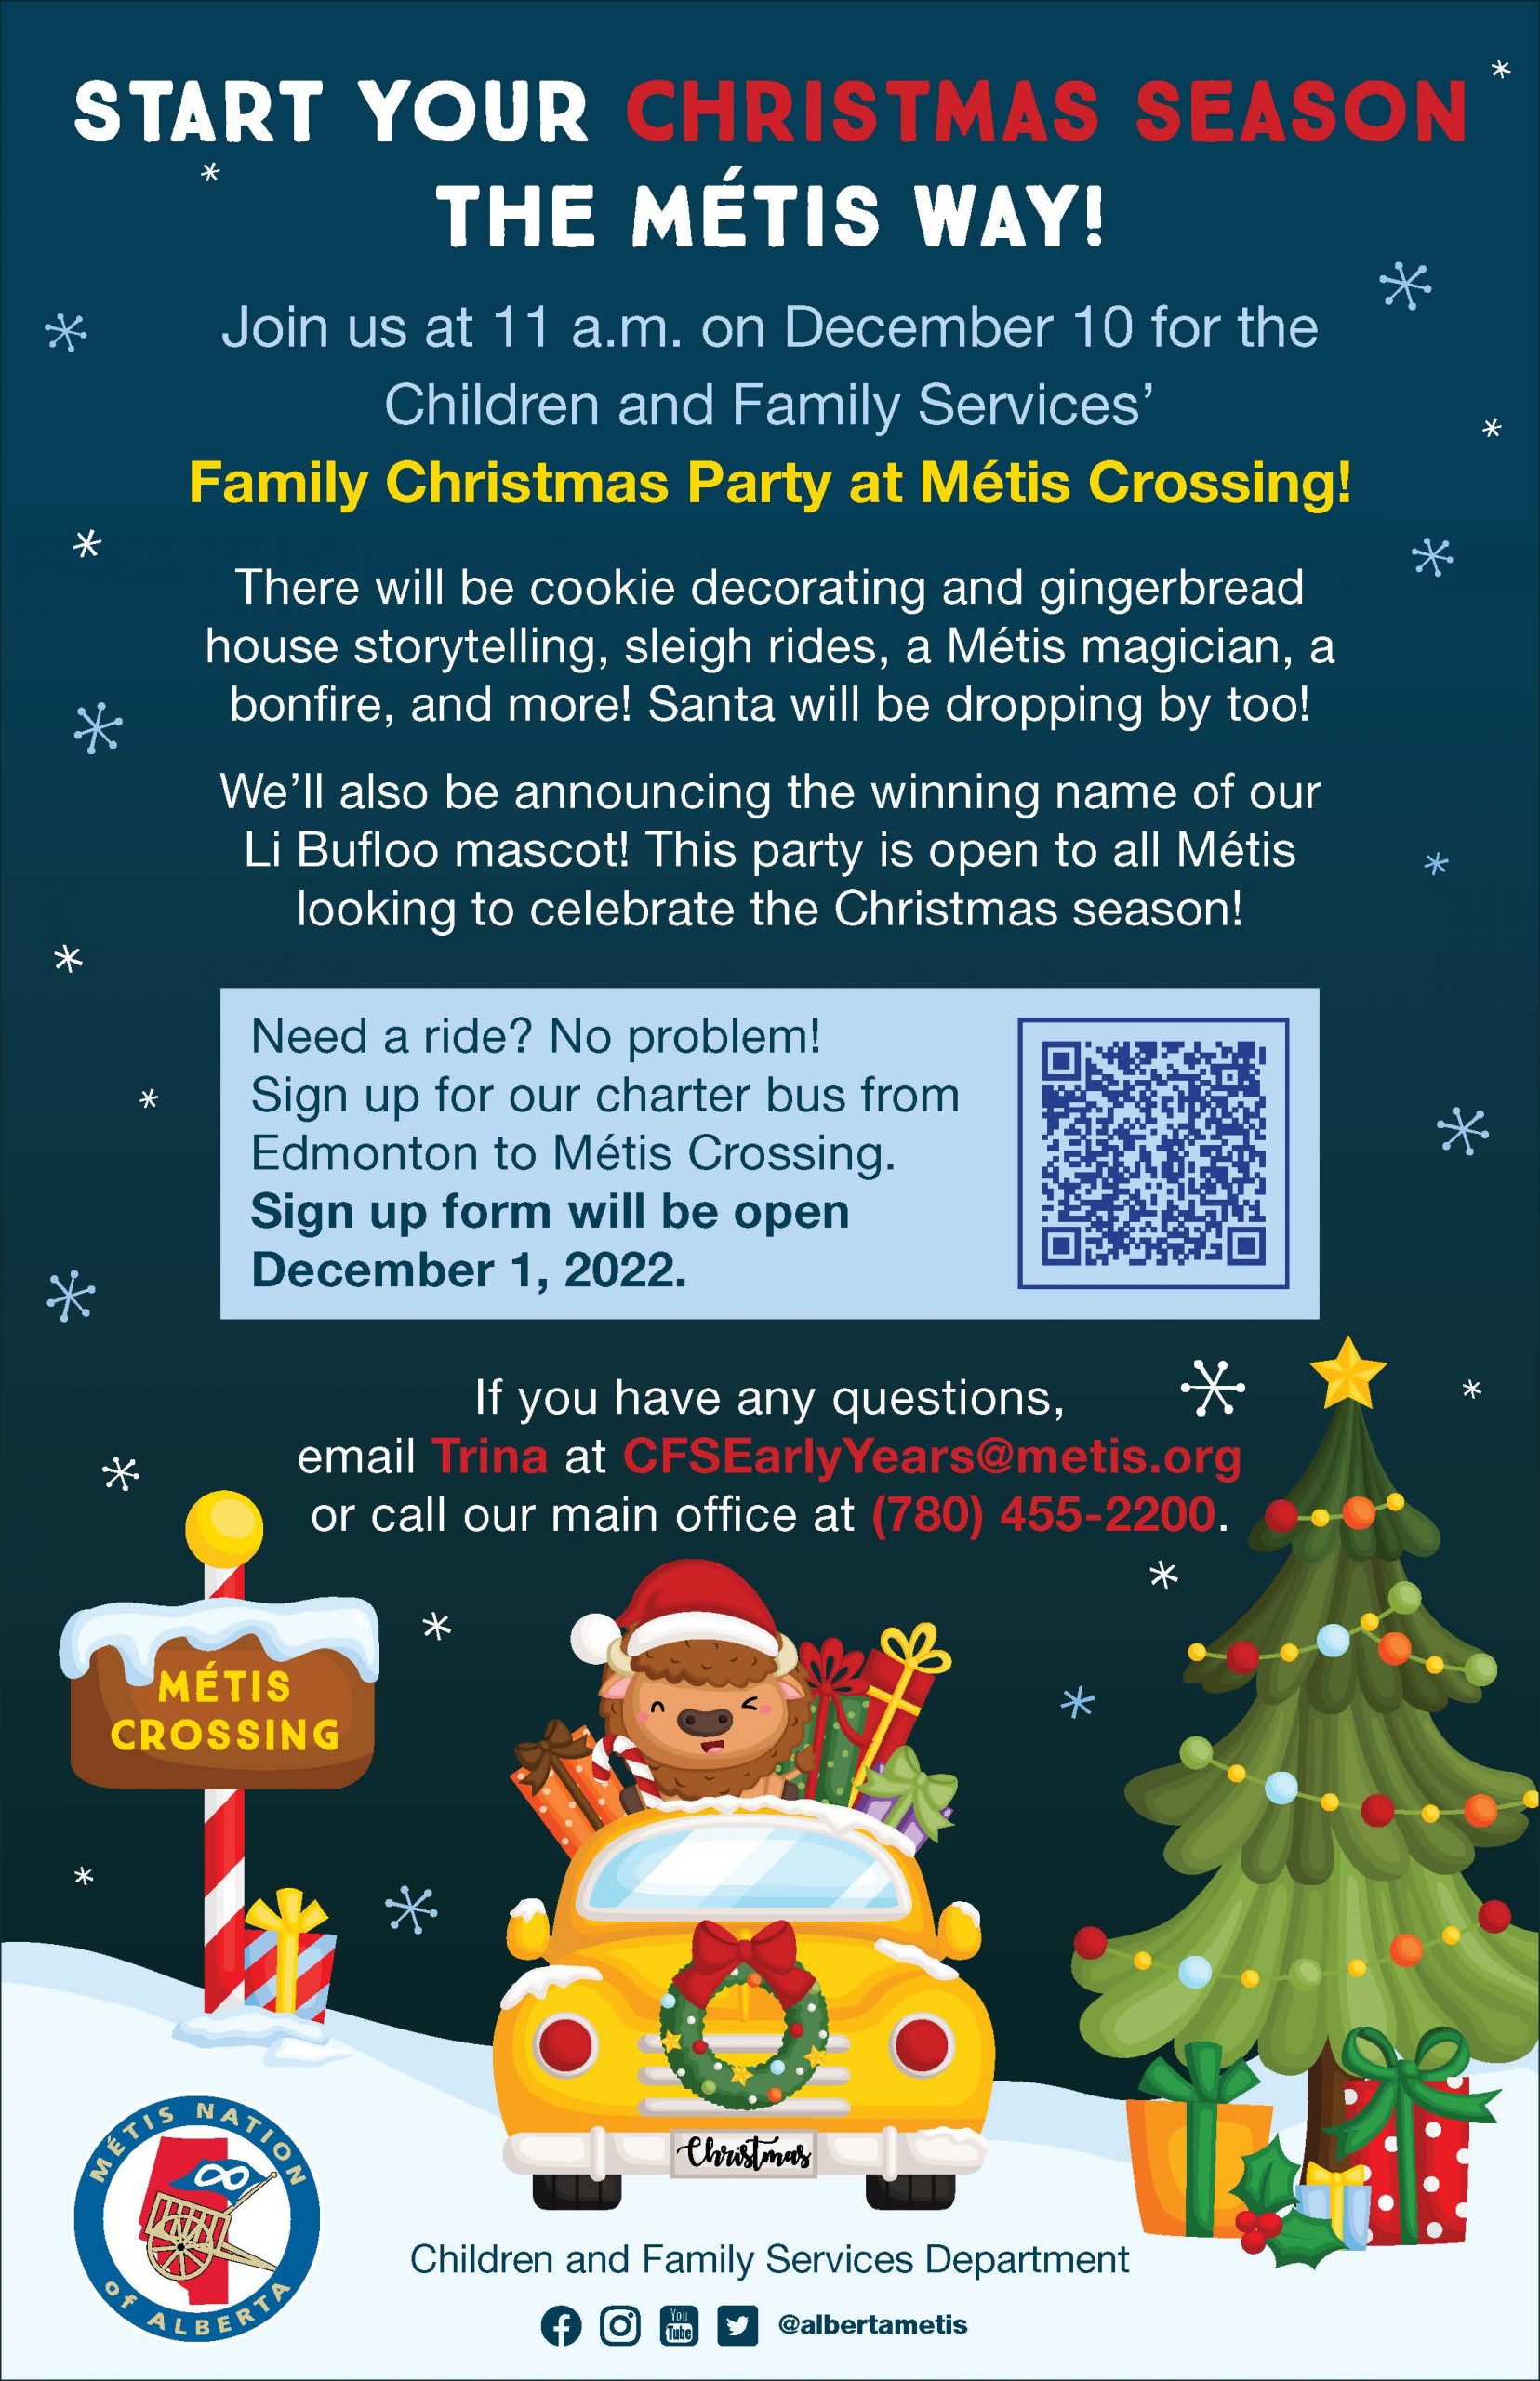 Start your Christmas season the Métis way! Join us at 11 a.m. on December 10 for the Children and Family Services’ Family Christmas Party at Métis Crossing! There will be cookie decorating and gingerbread house storytelling, sleigh rides, a Métis magician, a bonfire, and more! Santa will be dropping by too! We’ll also be announcing the winning name of our Li Bufloo mascot! This party is open to all Métis looking to celebrate the Christmas season! Need a ride? No problem! Sign up for our charter bus from Edmonton to Métis Crossing. Sign up form will open December 1, 2022. If you have any questions, just email Trina at CFSEarlyYears@metis.org or call our main office at (780) 455-2200.